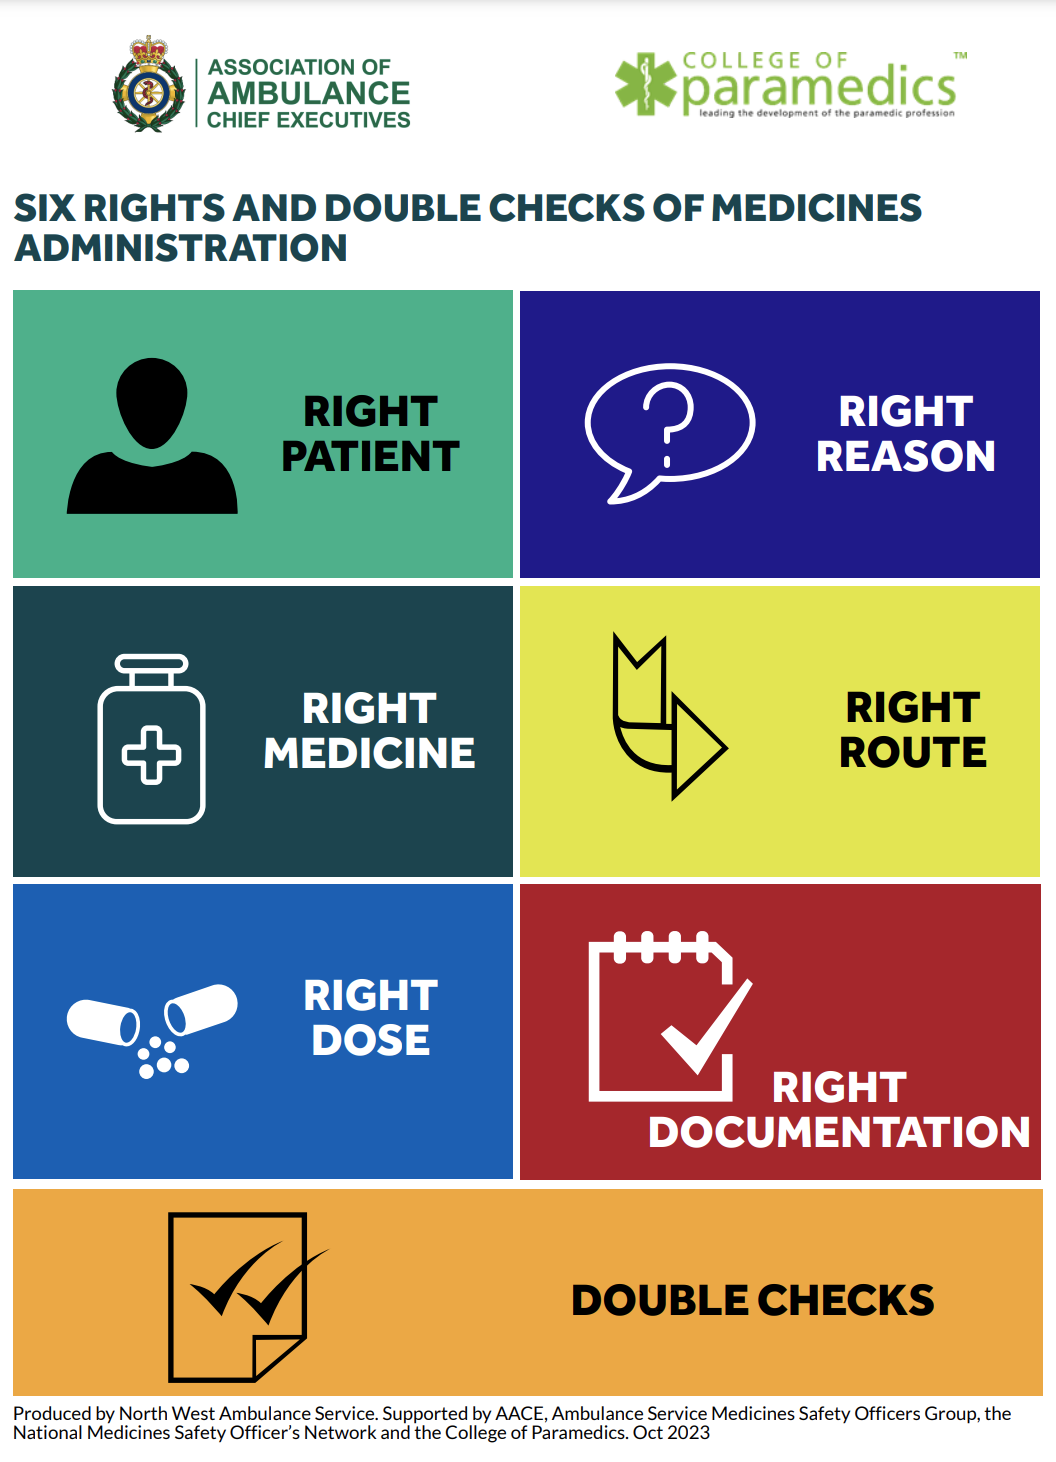 6 rights of medicines administration - paramedics/prehospital care featured image